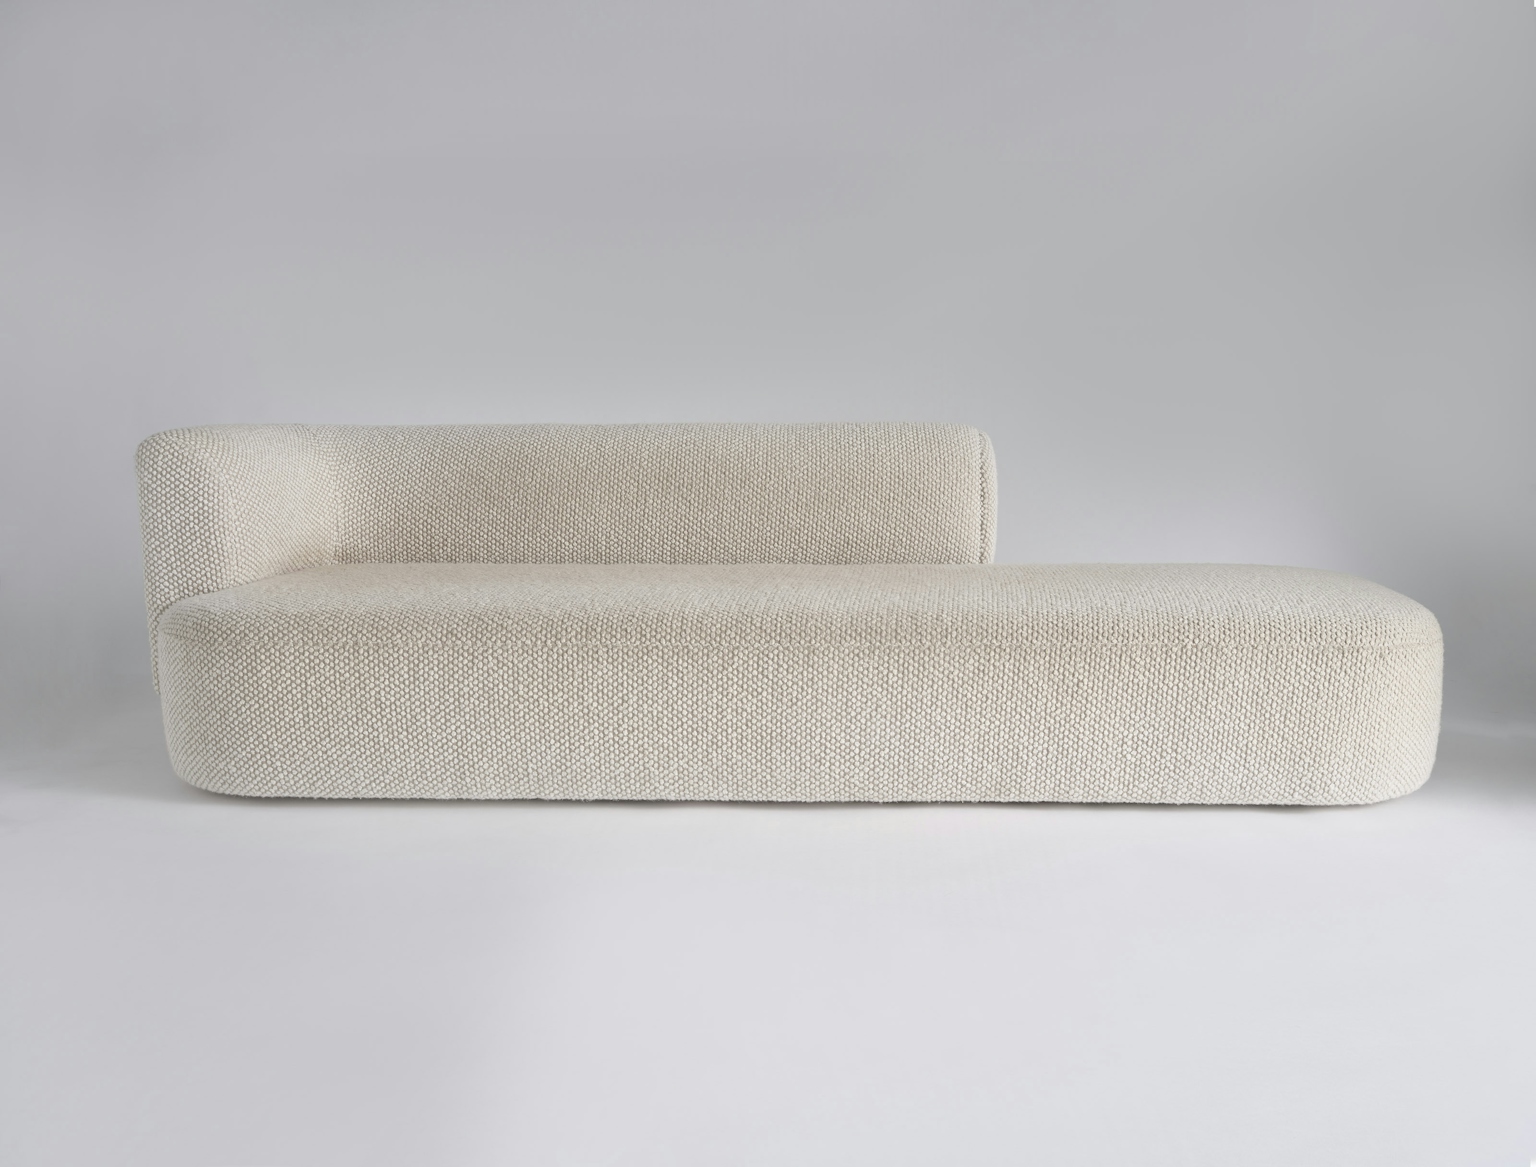 Introducing: Capper Chaise